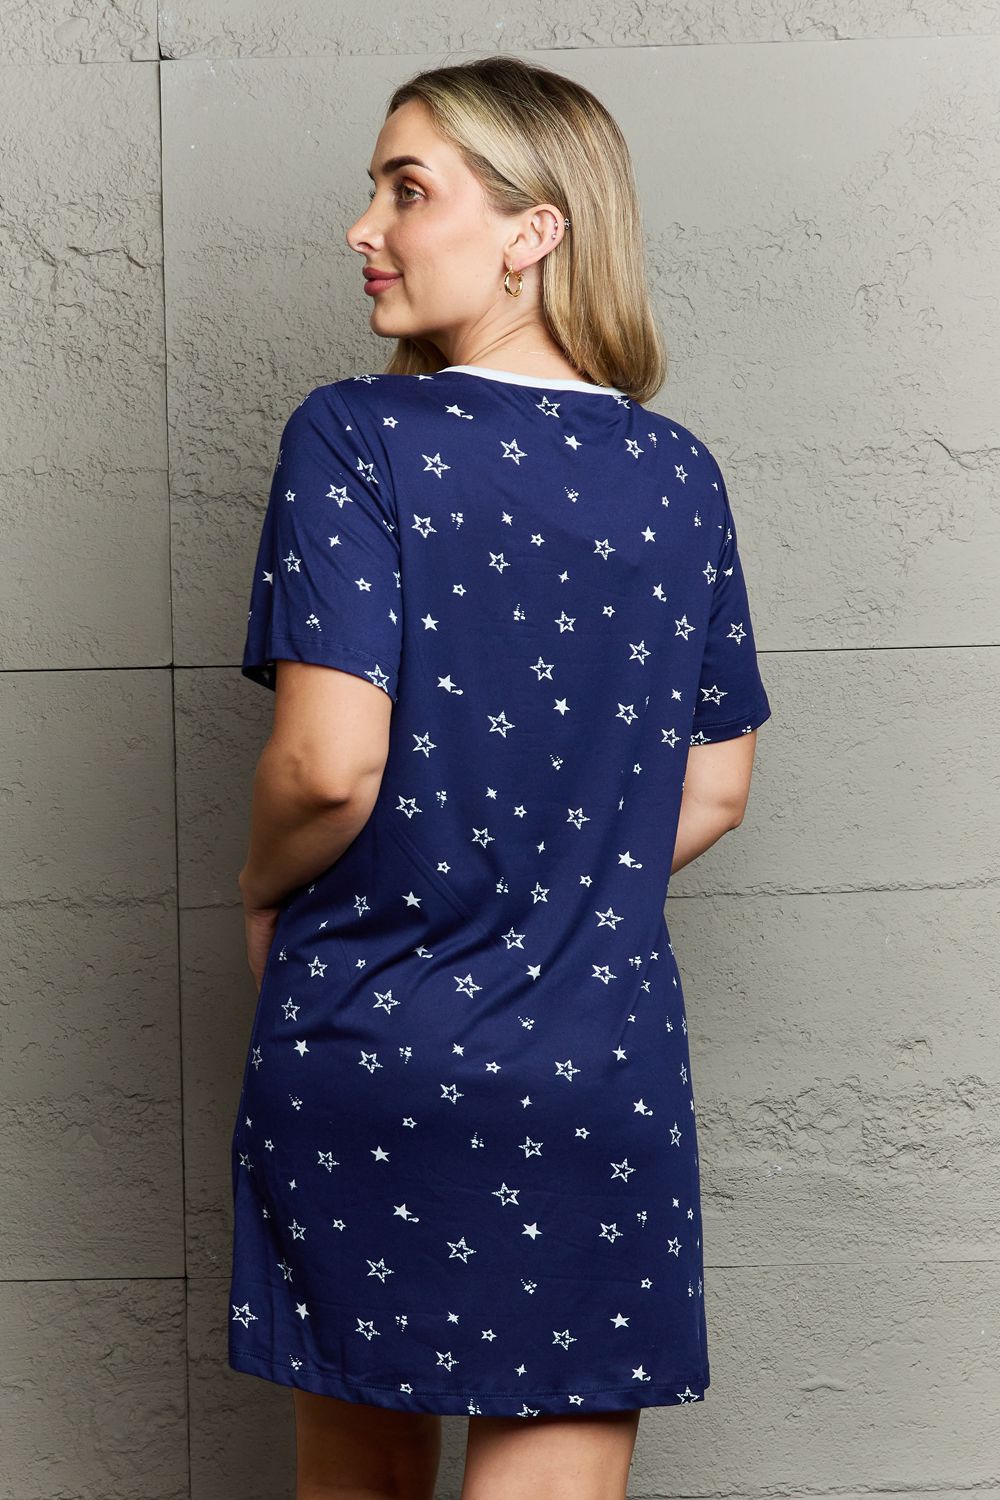 MOON NITE Quilted Quivers Button Down Sleepwear Dress - Tigbul's Fashion